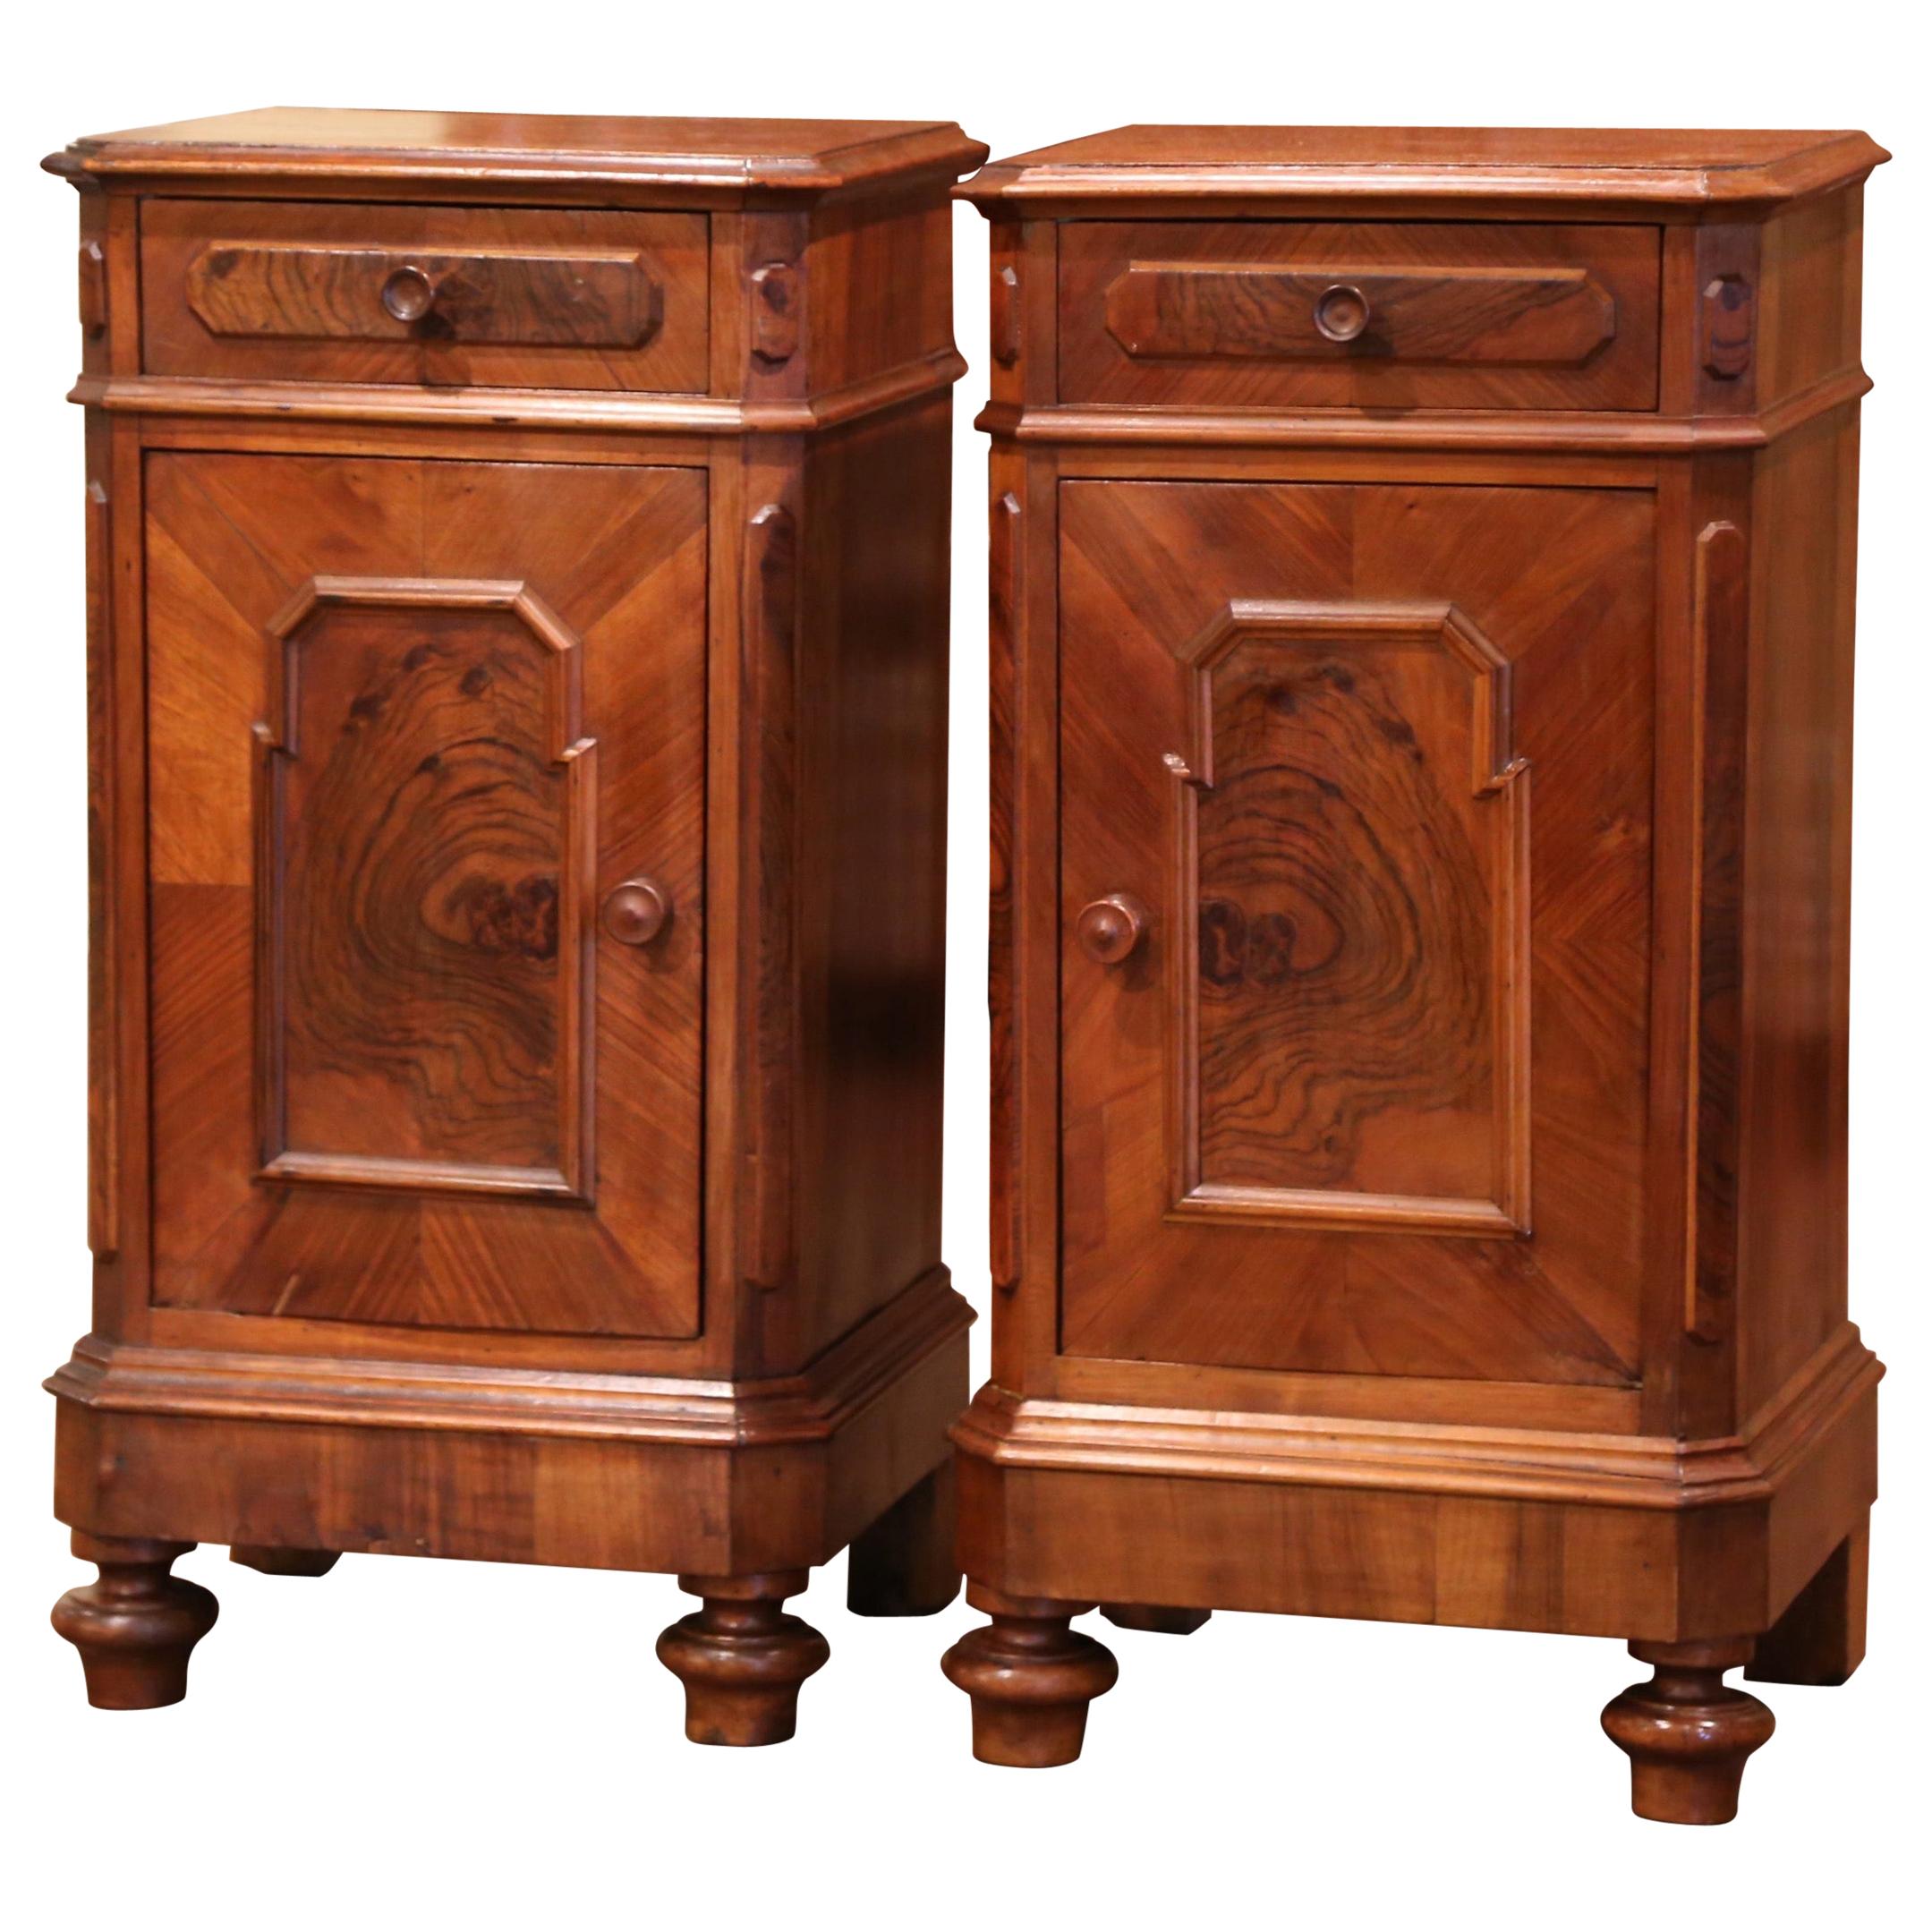 Pair of Mid-19th Century French Louis Philippe Walnut and Burl Bedside Tables